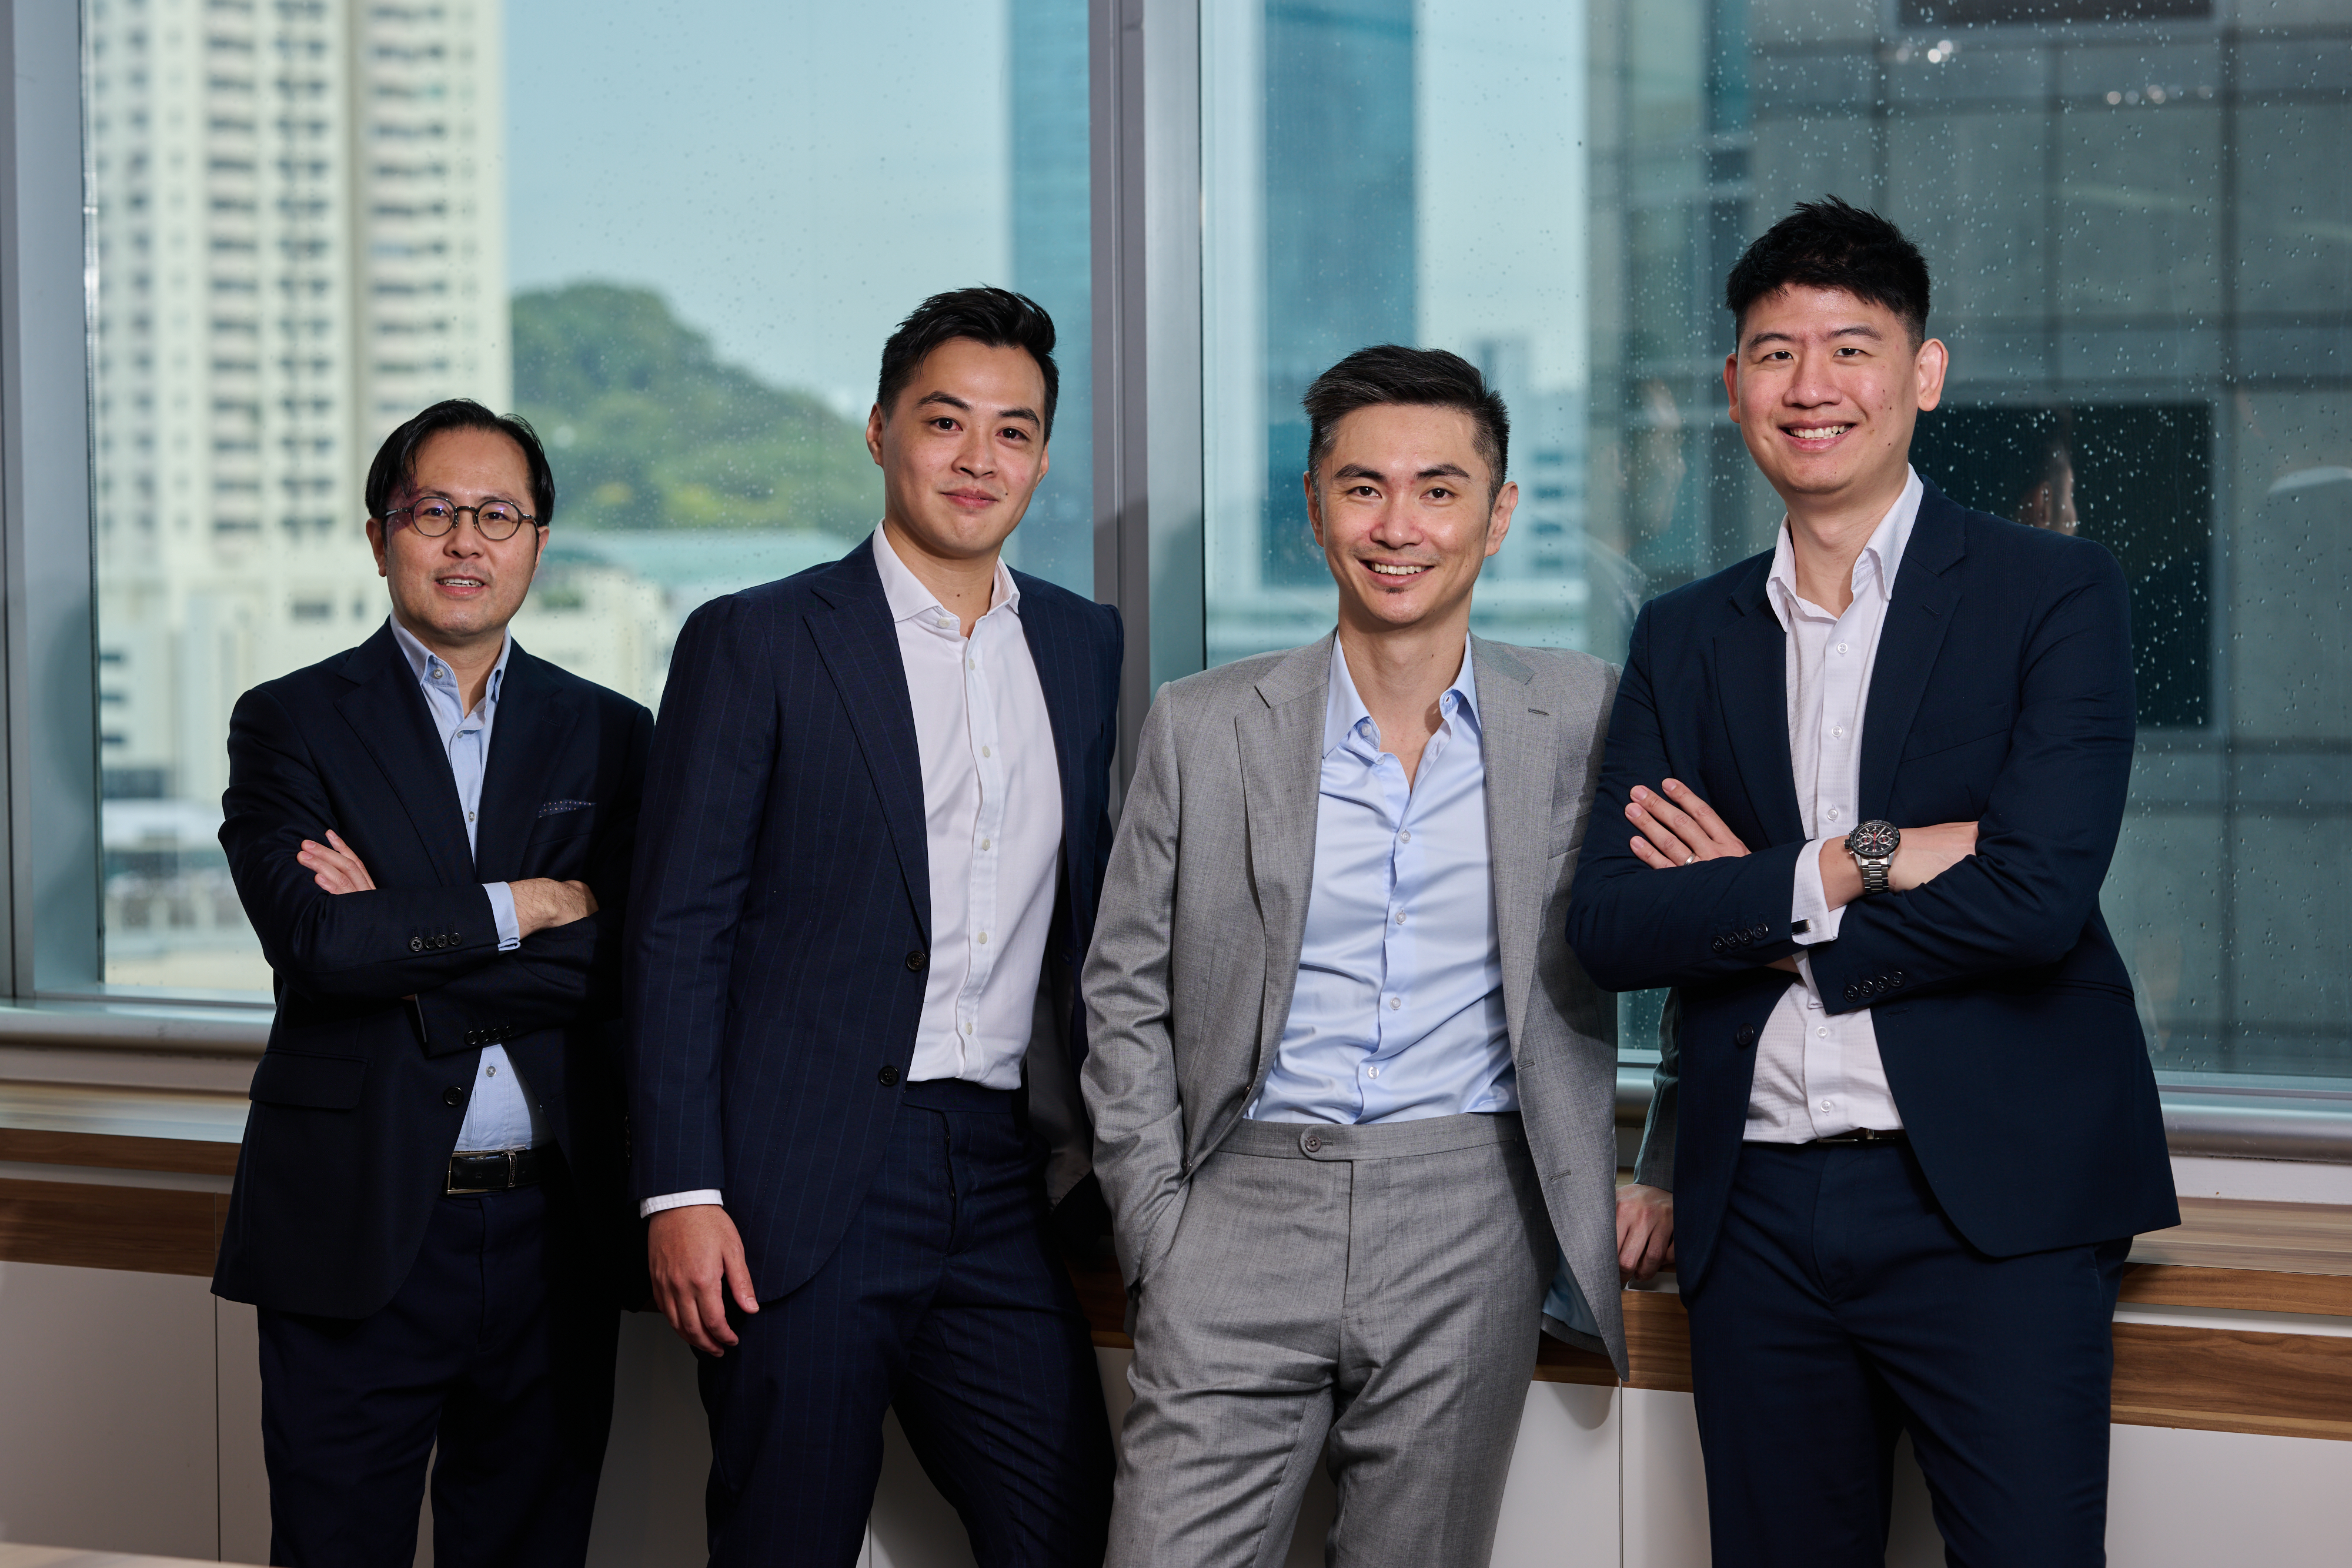 Aura Private Equity Singapore team standing together against a city scape